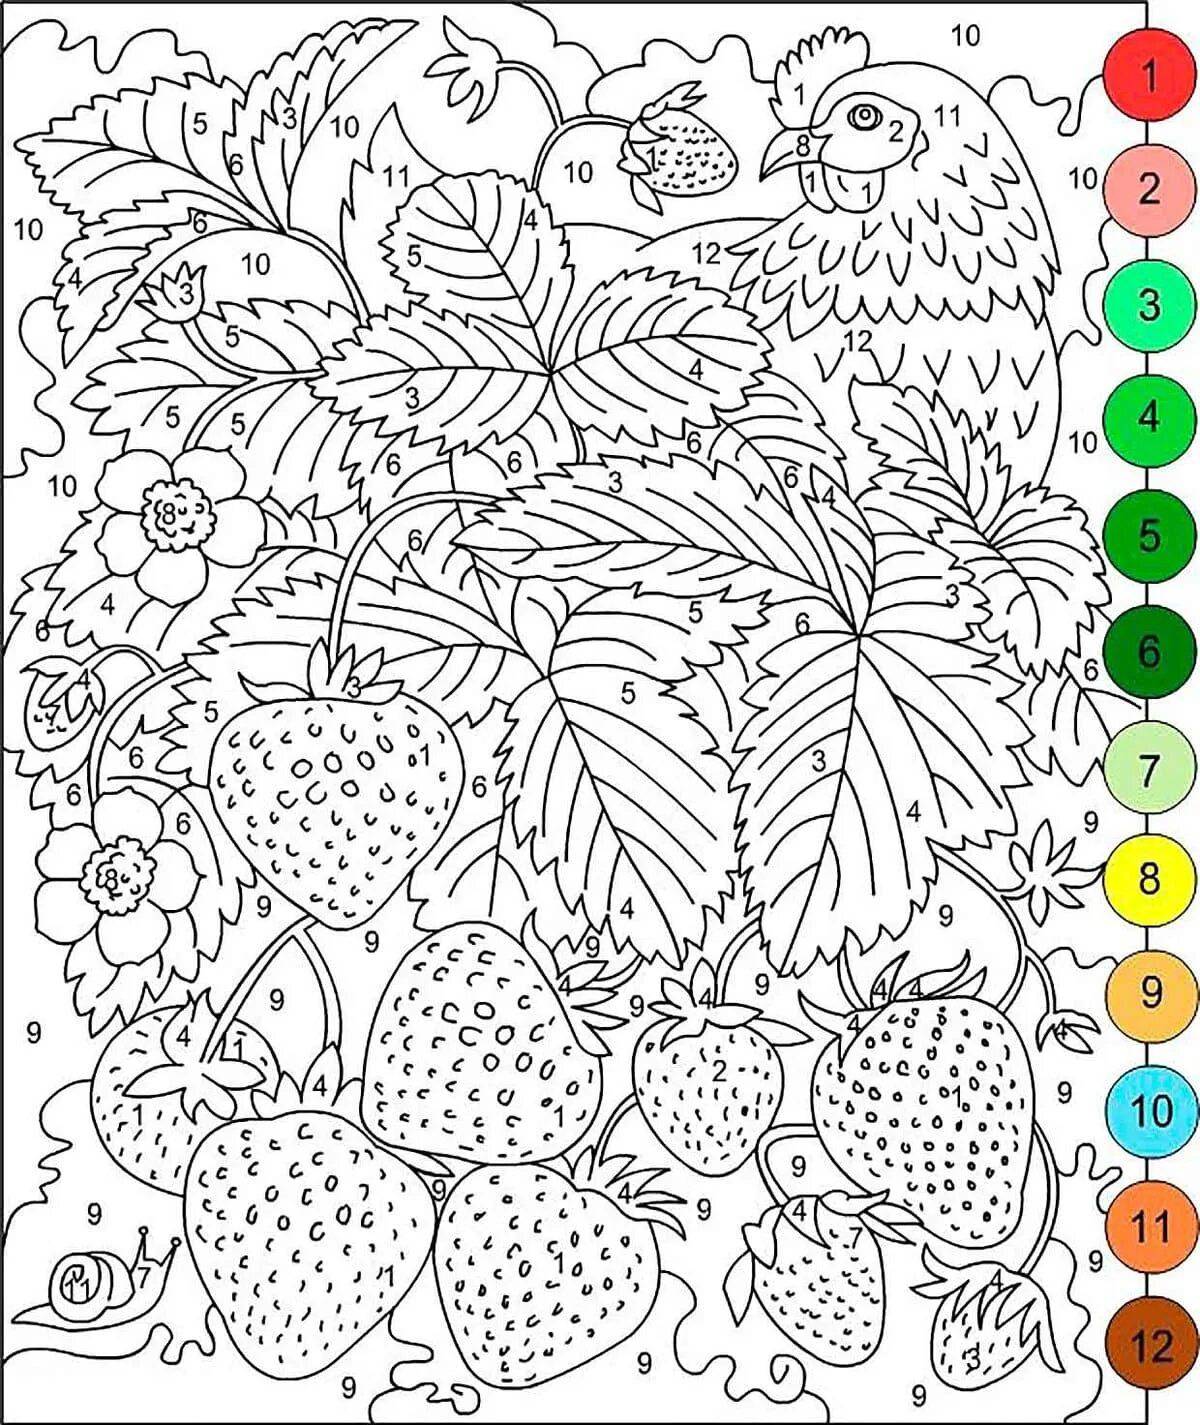 Colorful-exploration print by numbers coloring page